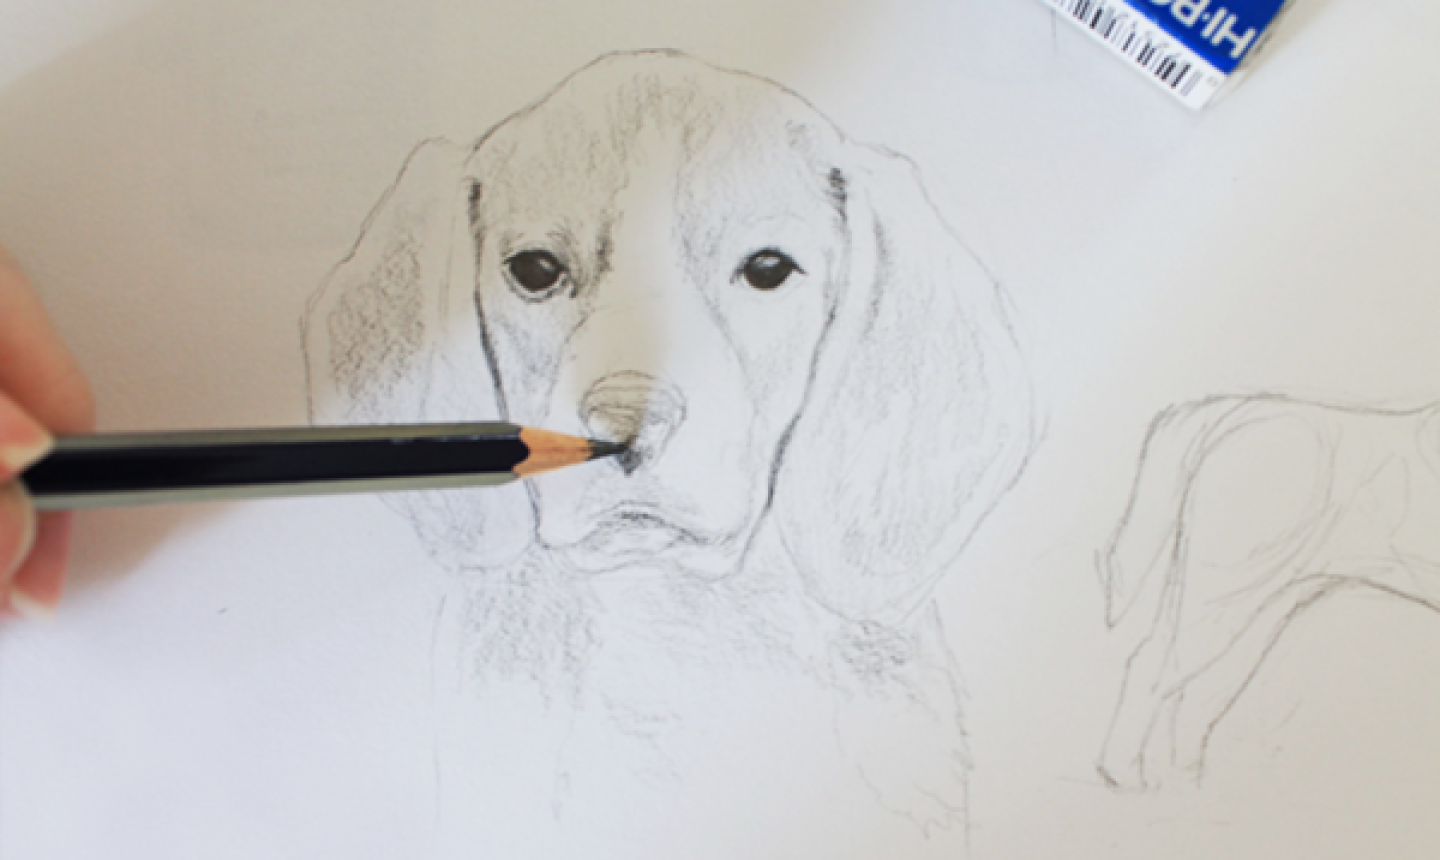 Drawing Realistic Animals: How to Draw a Dog | Craftsy